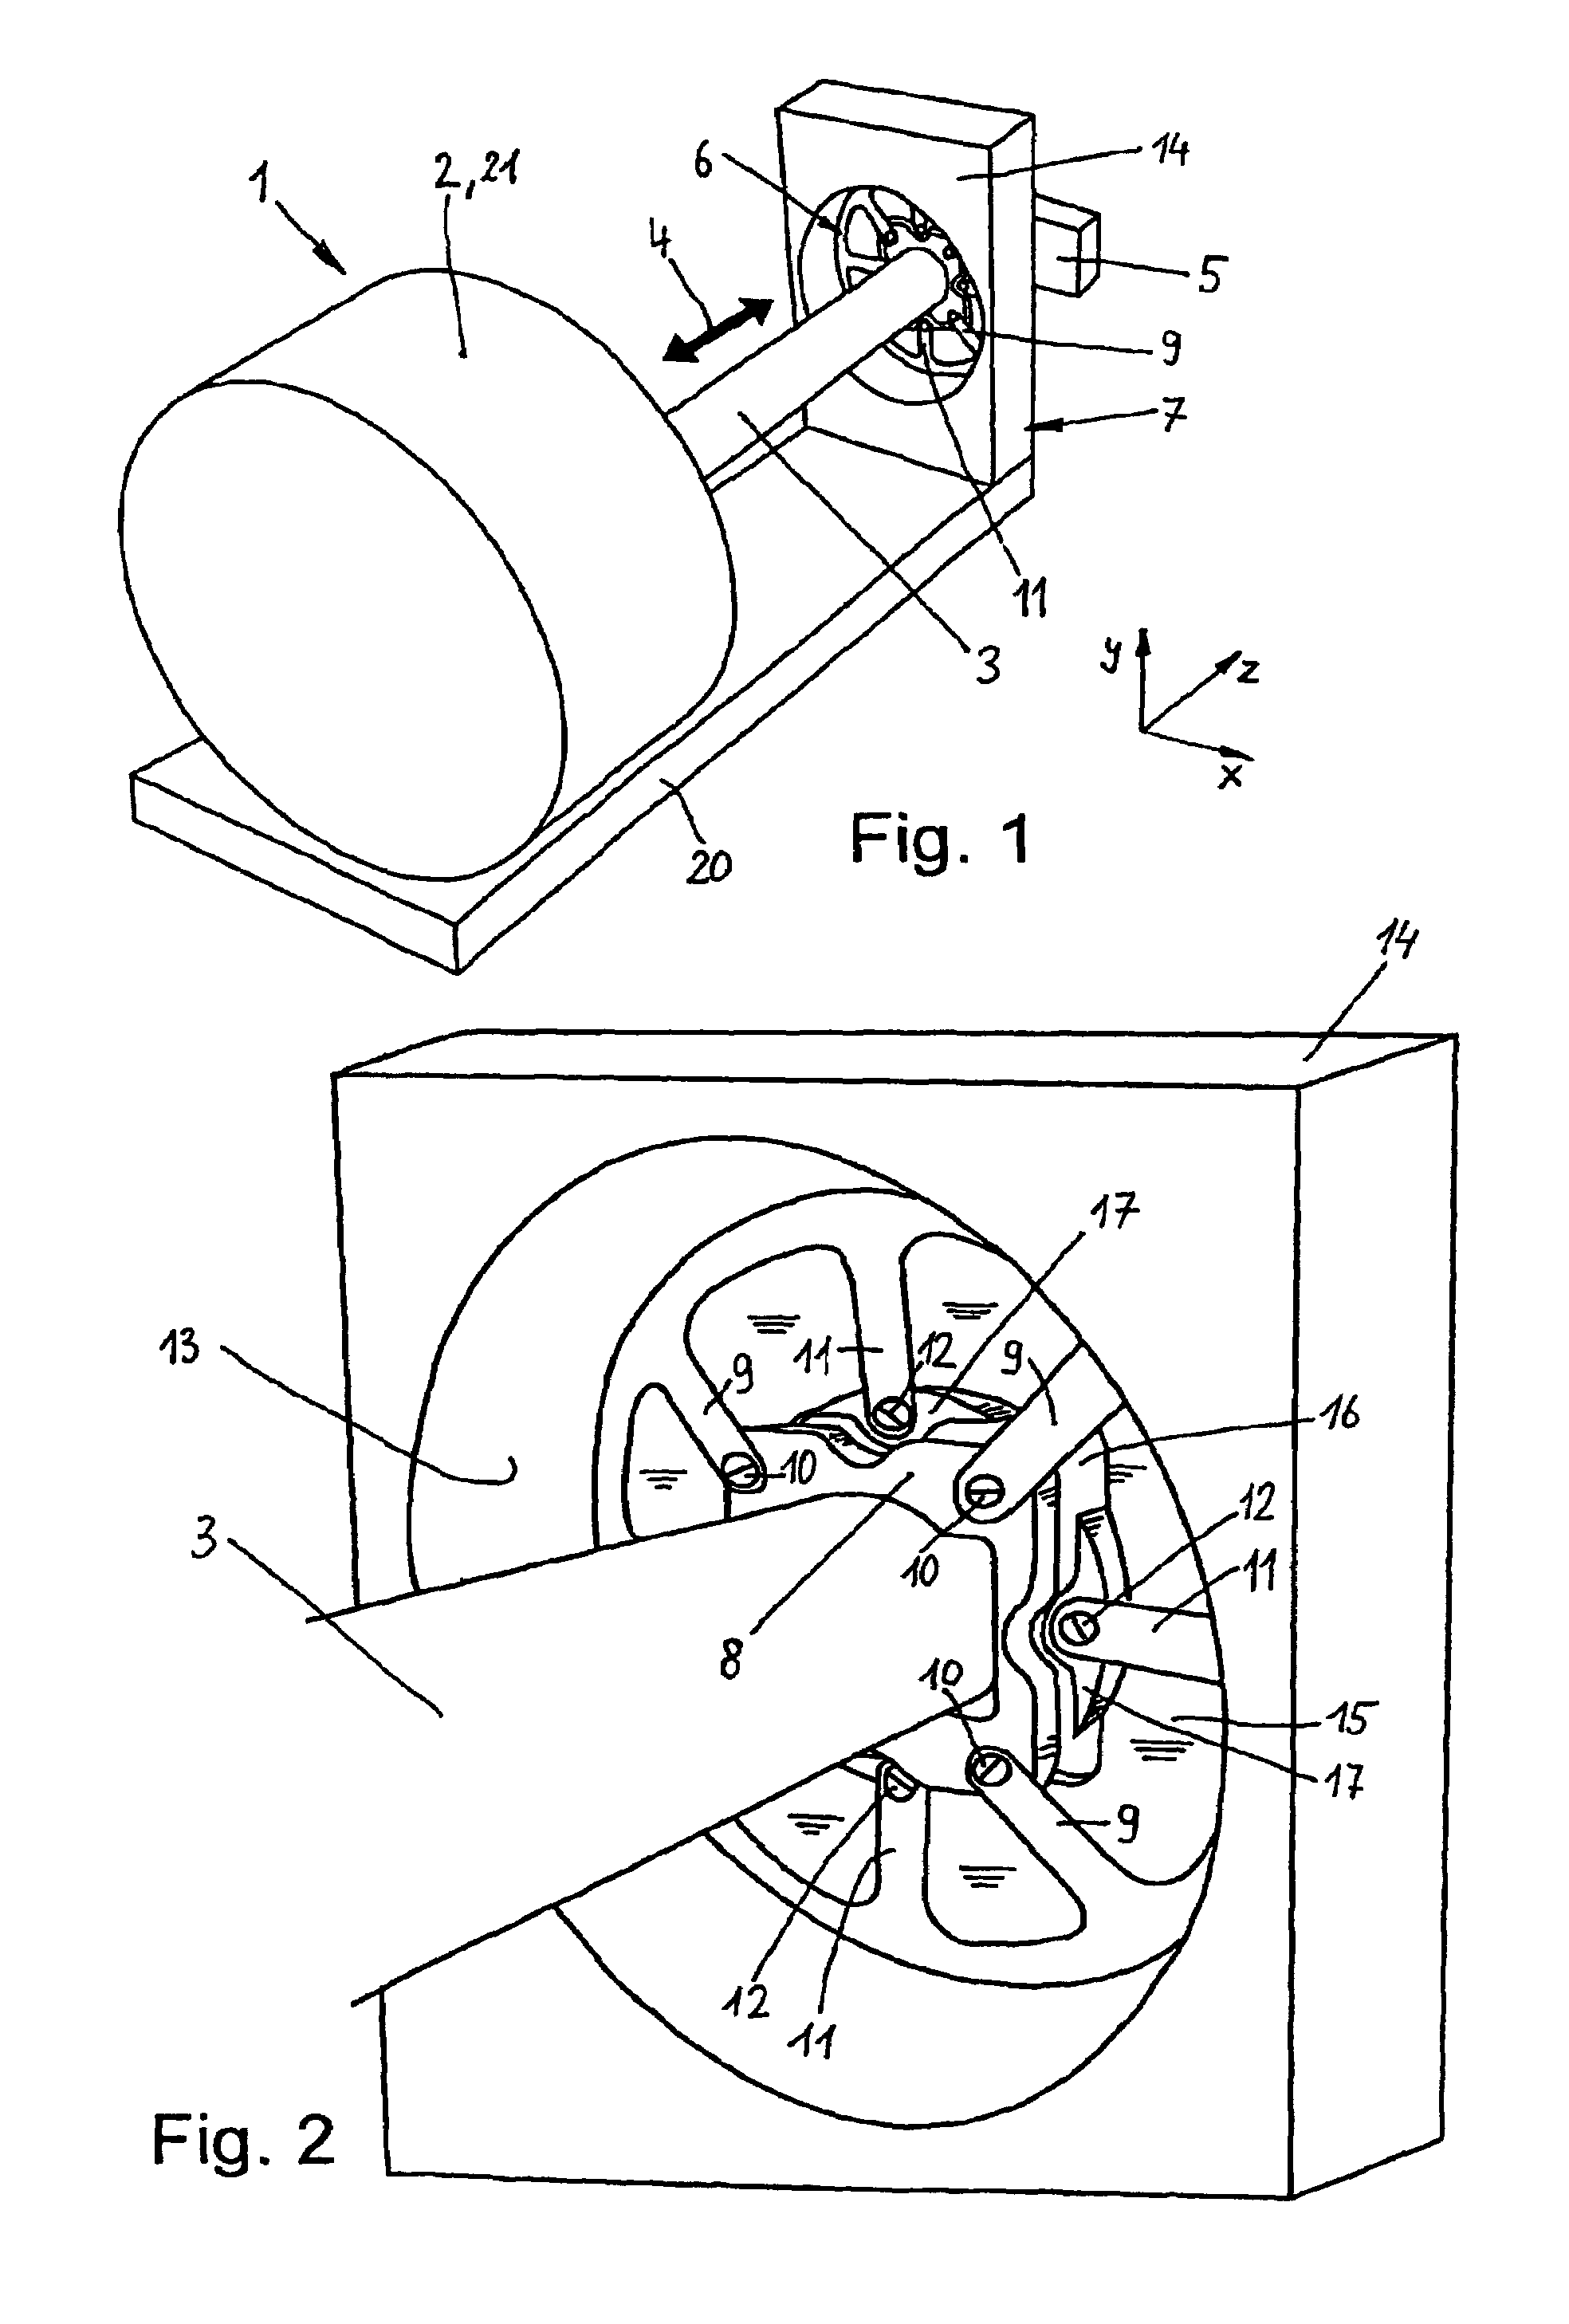 Handler comprising an acceleration device for testing electronic components